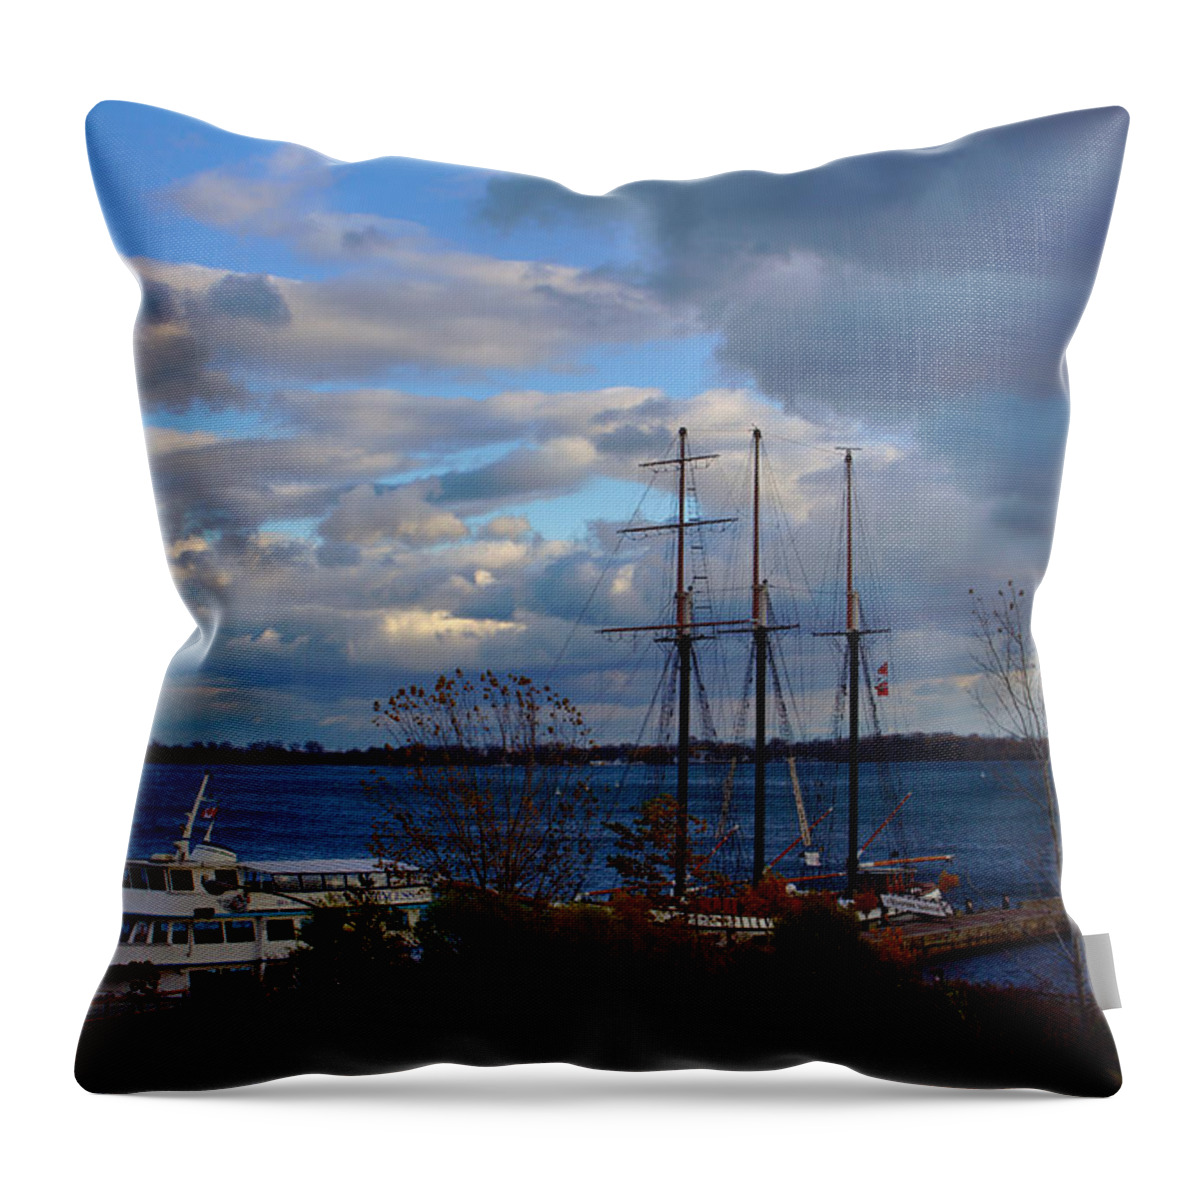 Toronto Throw Pillow featuring the photograph Harbourfront by Nicky Jameson